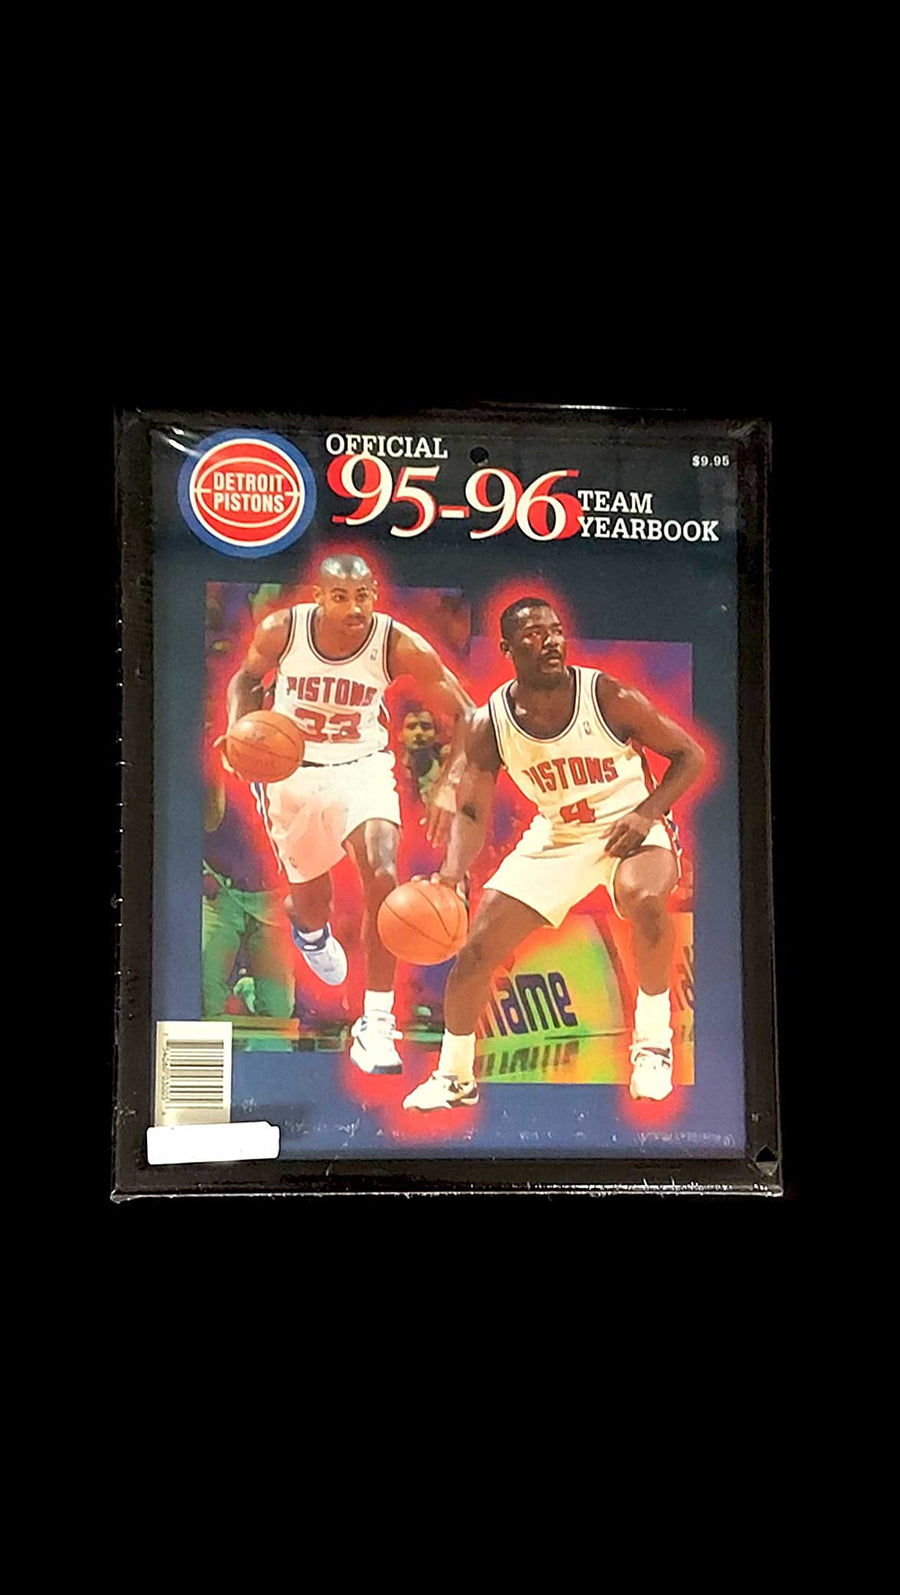 Detroit-Pistons-Official-95-96-Team-Yearbook